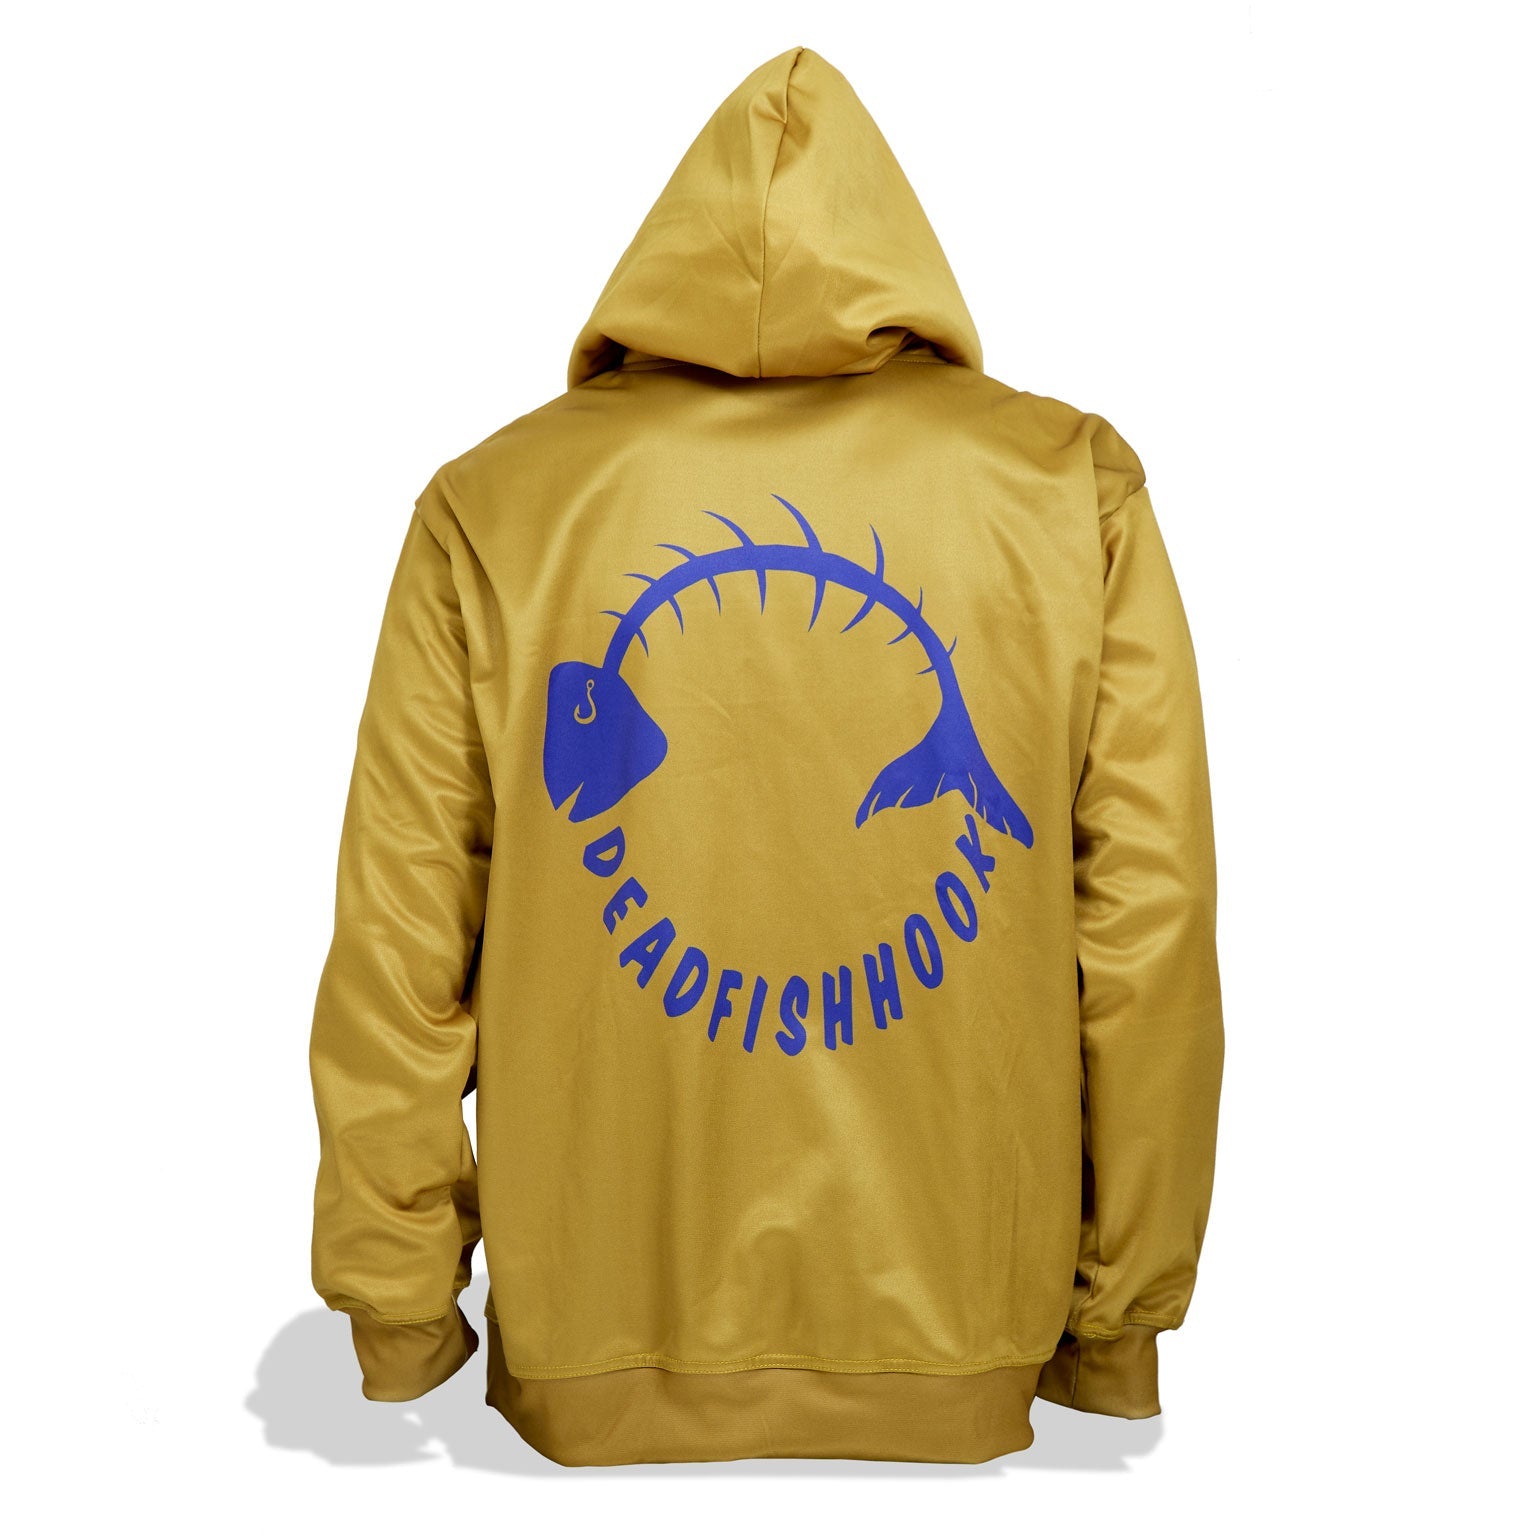 Youth Gold Zippered Hoody with Hand Pockets.